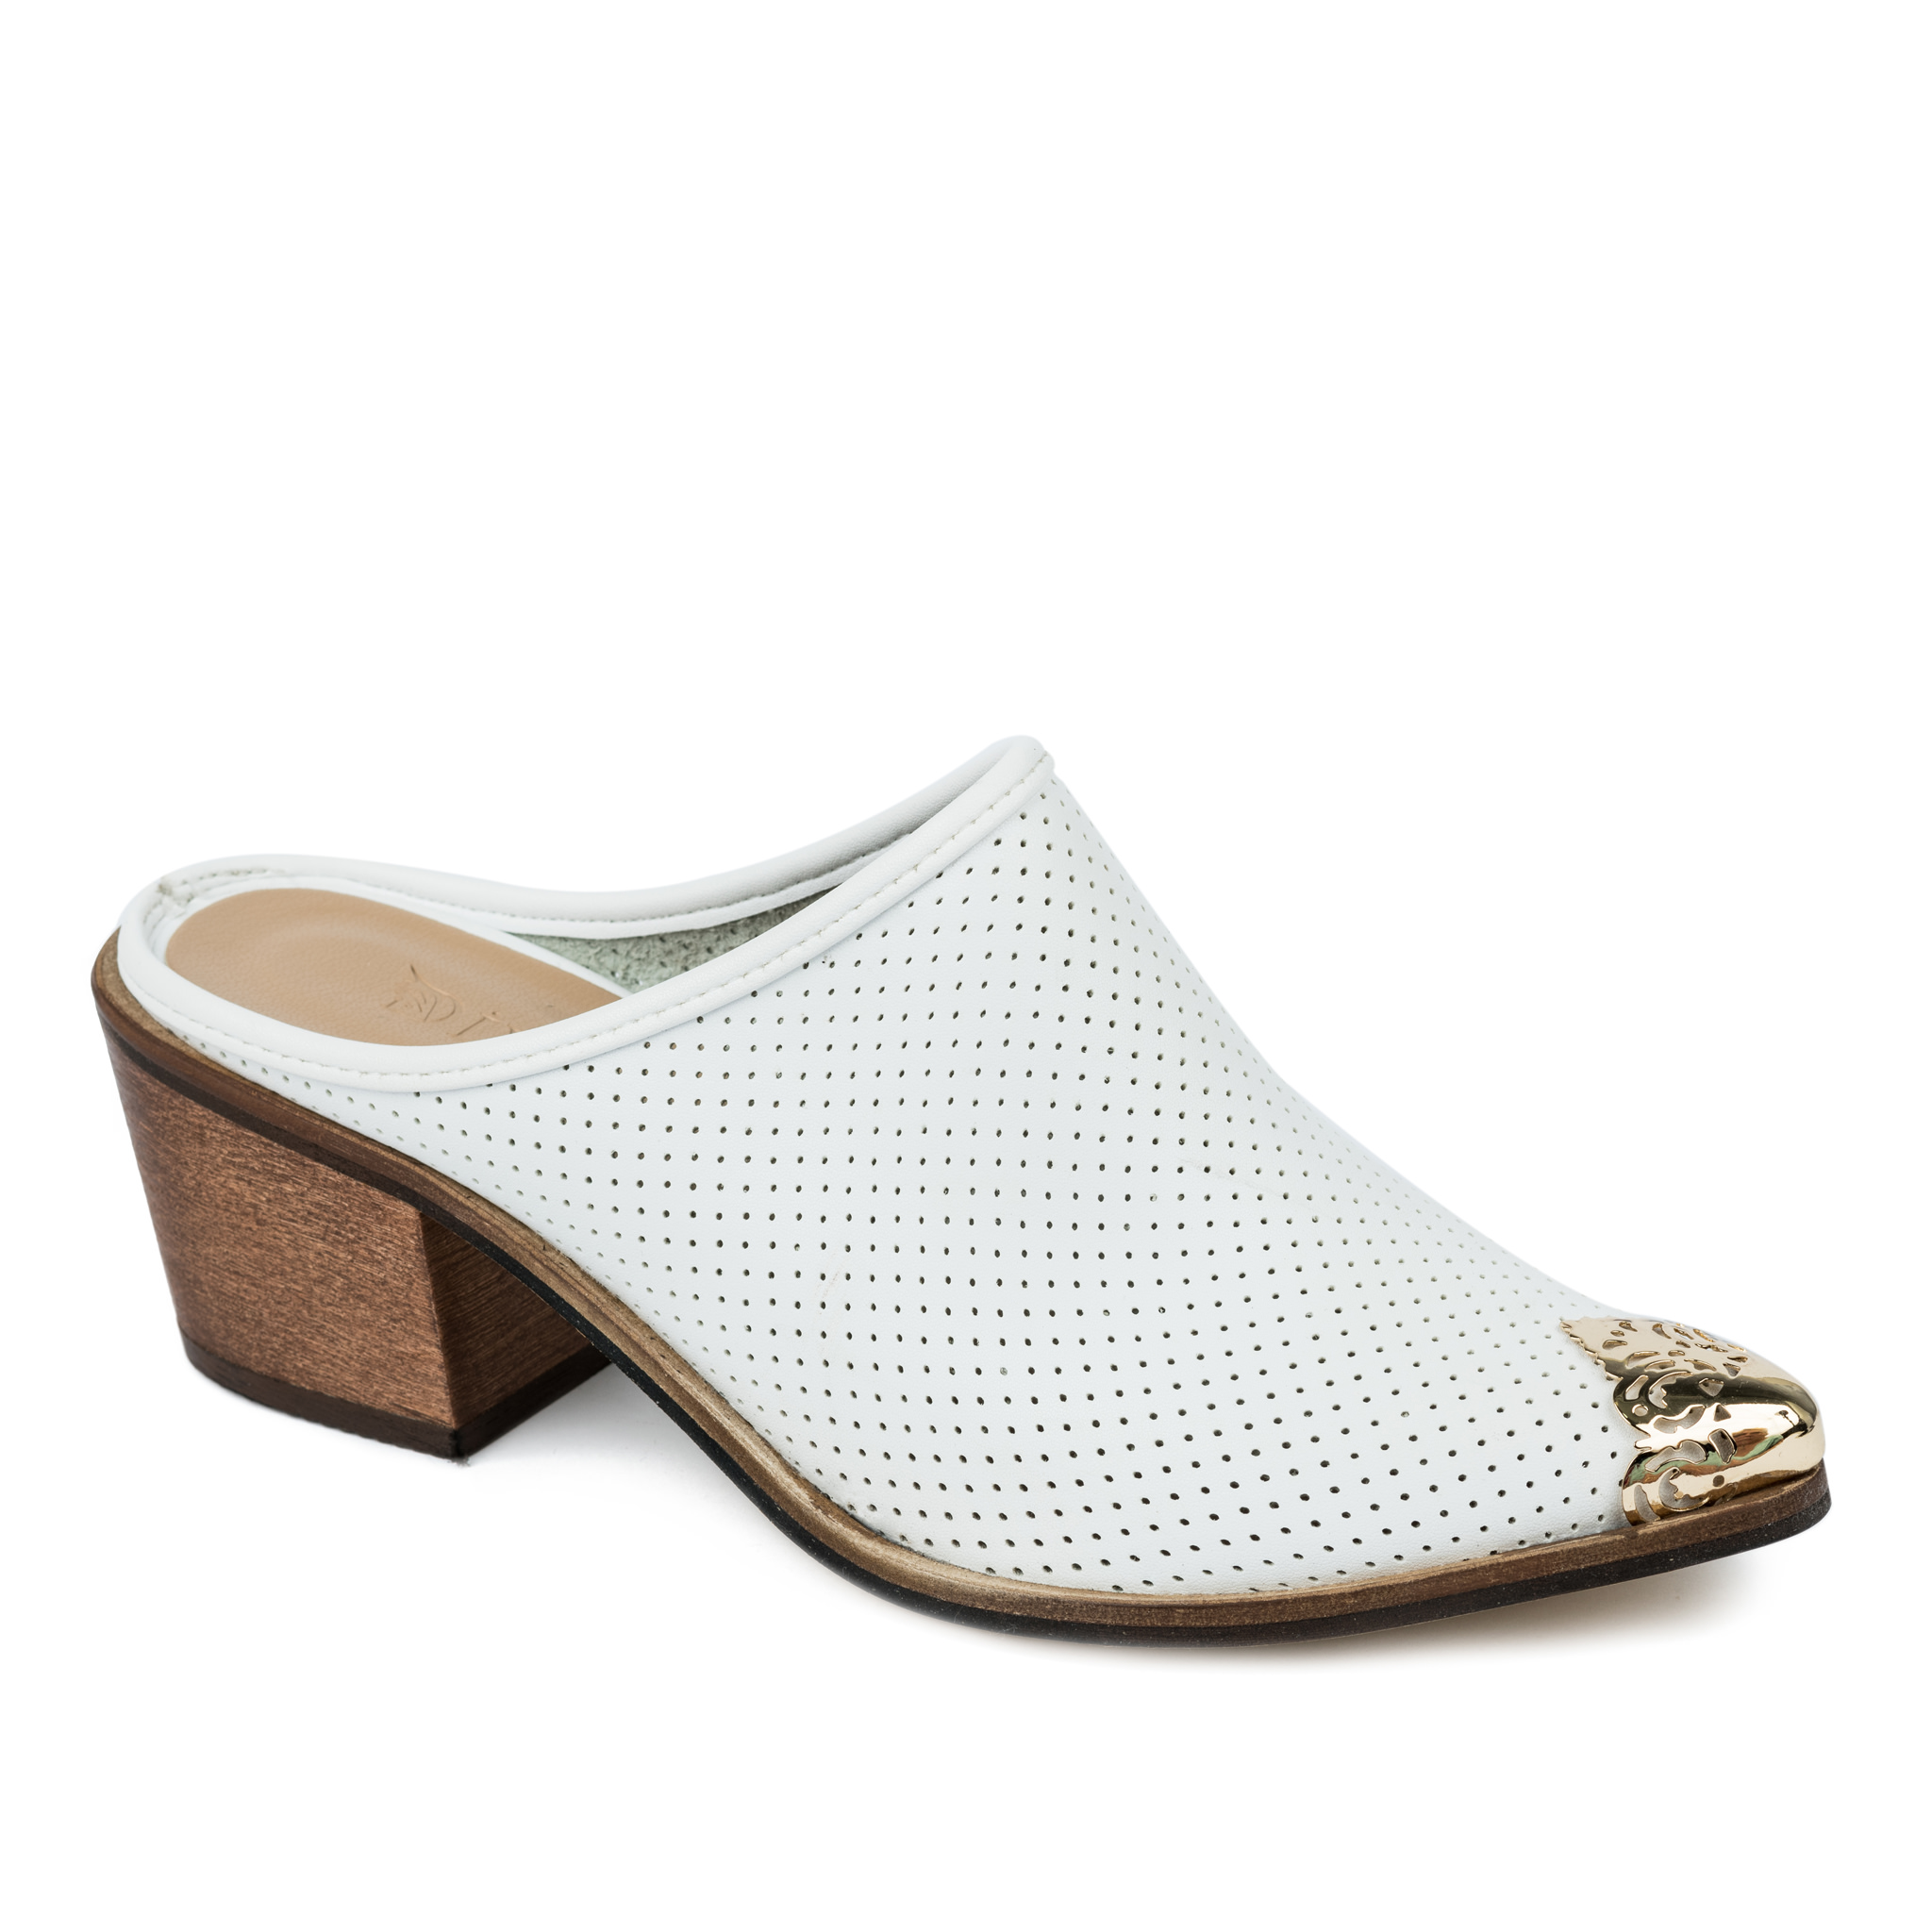 HOLLOW MULES WITH BLOCK HEEL - WHITE